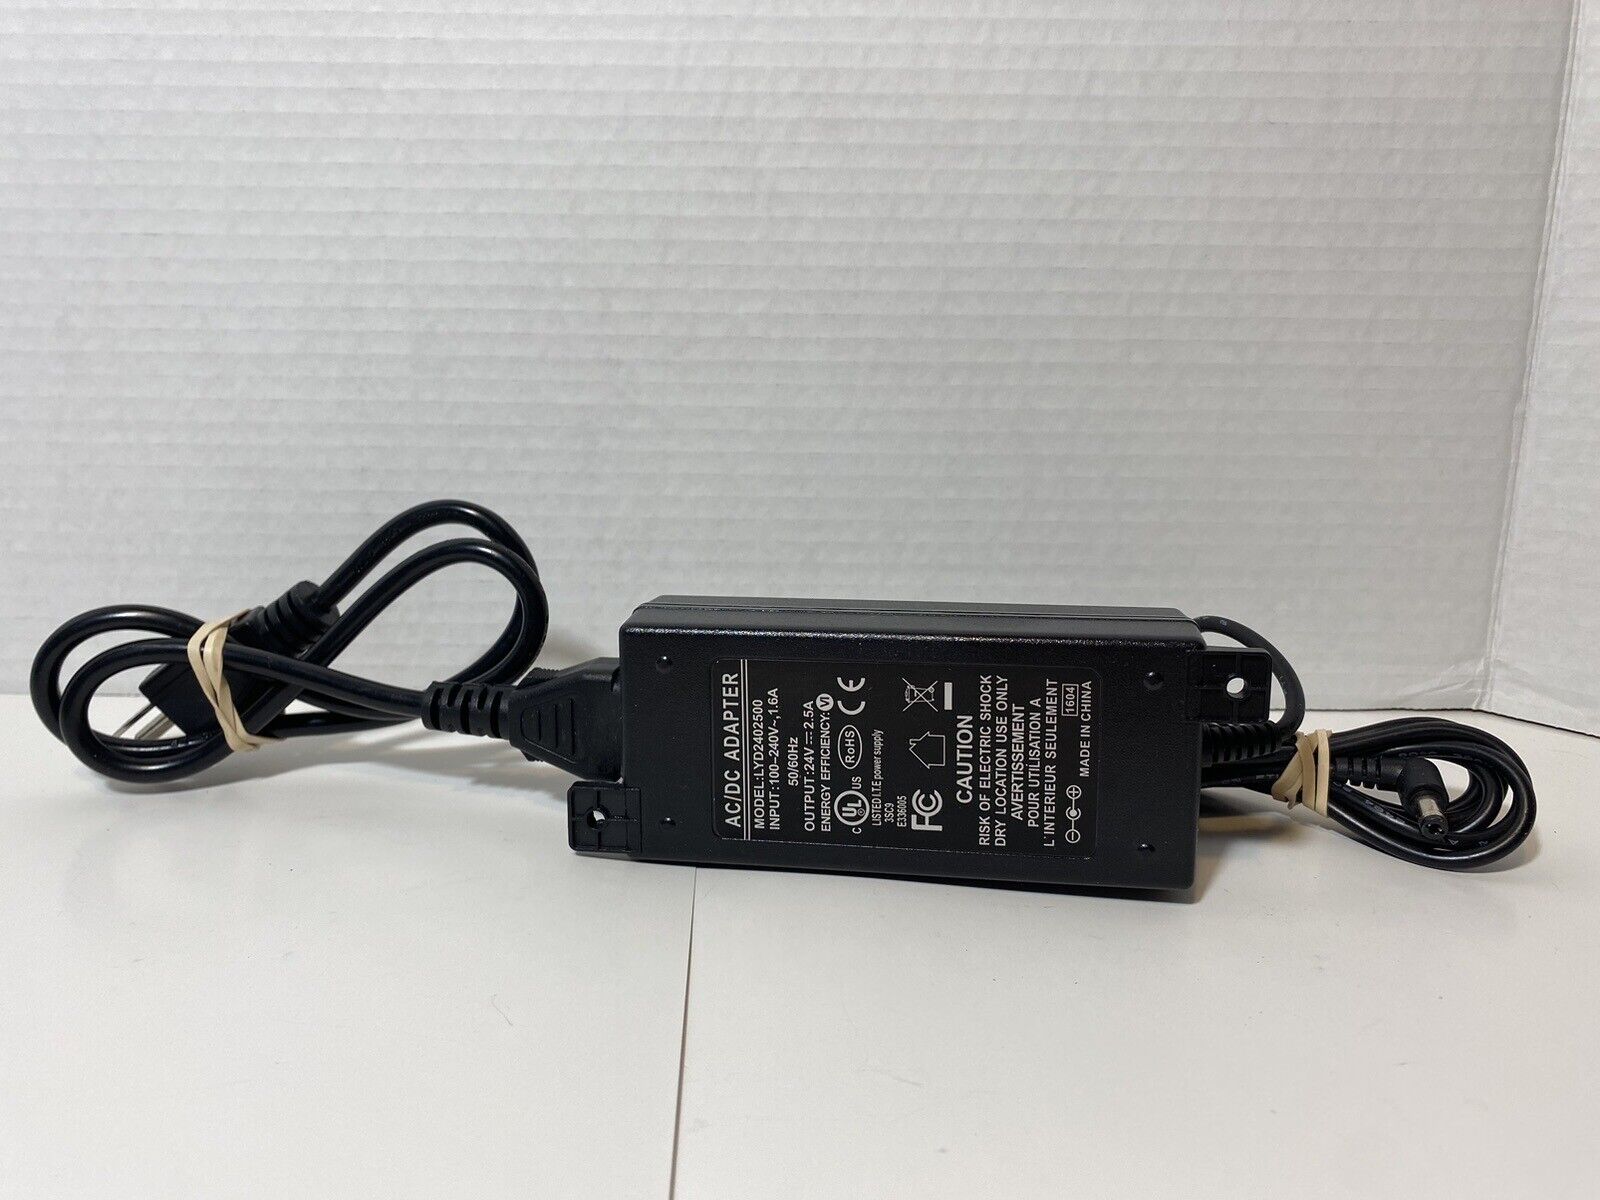 Power Supply 24V Can Be used for LED lights or PoE Texas PoE Injectors